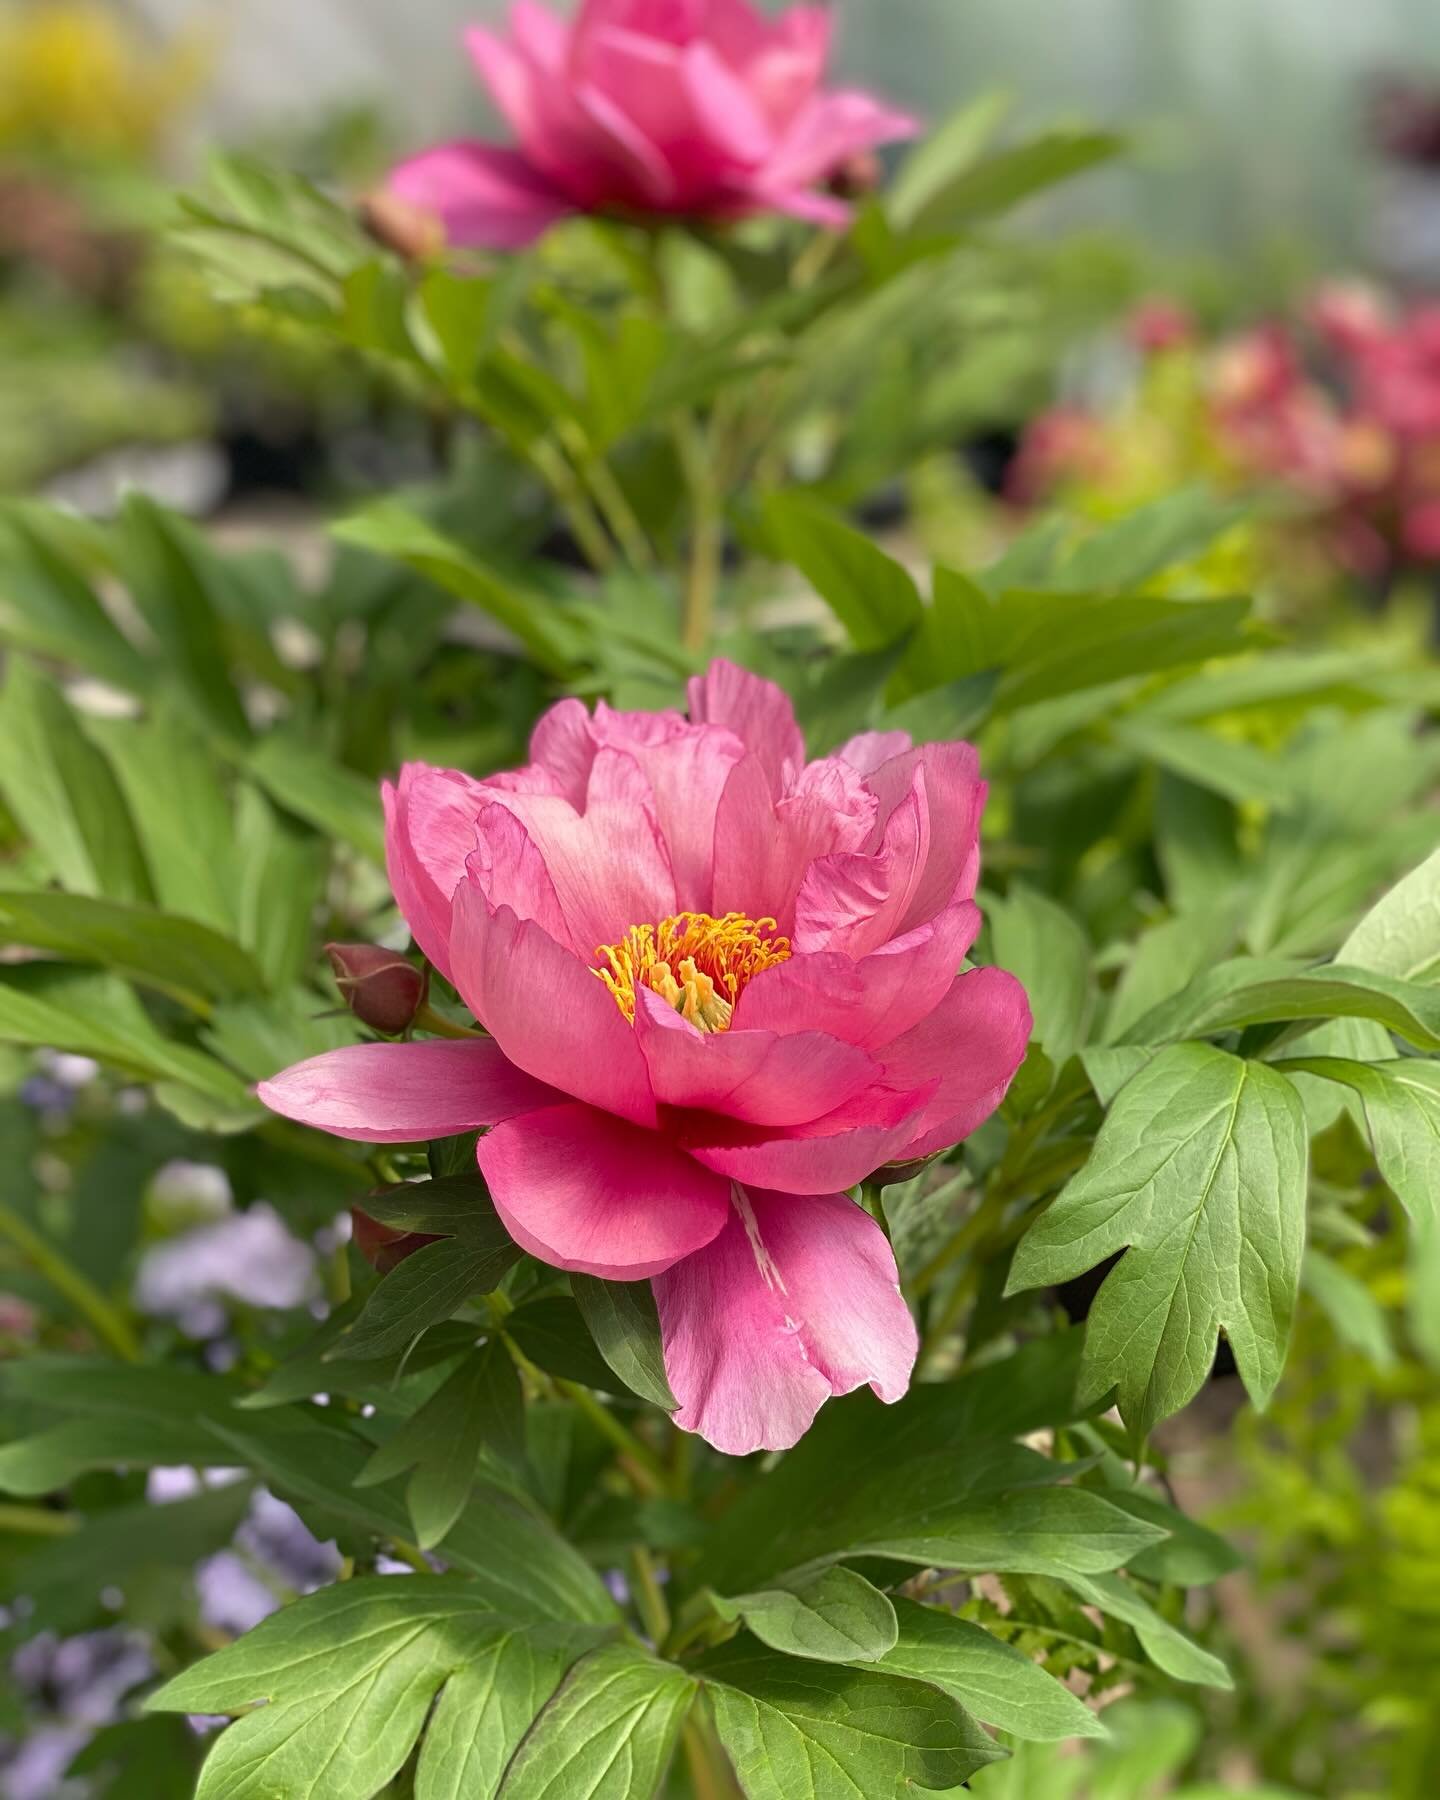 The Peonies are bursting with color here at the Nursery!

You&rsquo;ll find both herbaceous peonies, which are native to North America, as well as the much-coveted Itoh Peonies, named after Toichi Itoh, a specialized peony grower from Japan. He succe